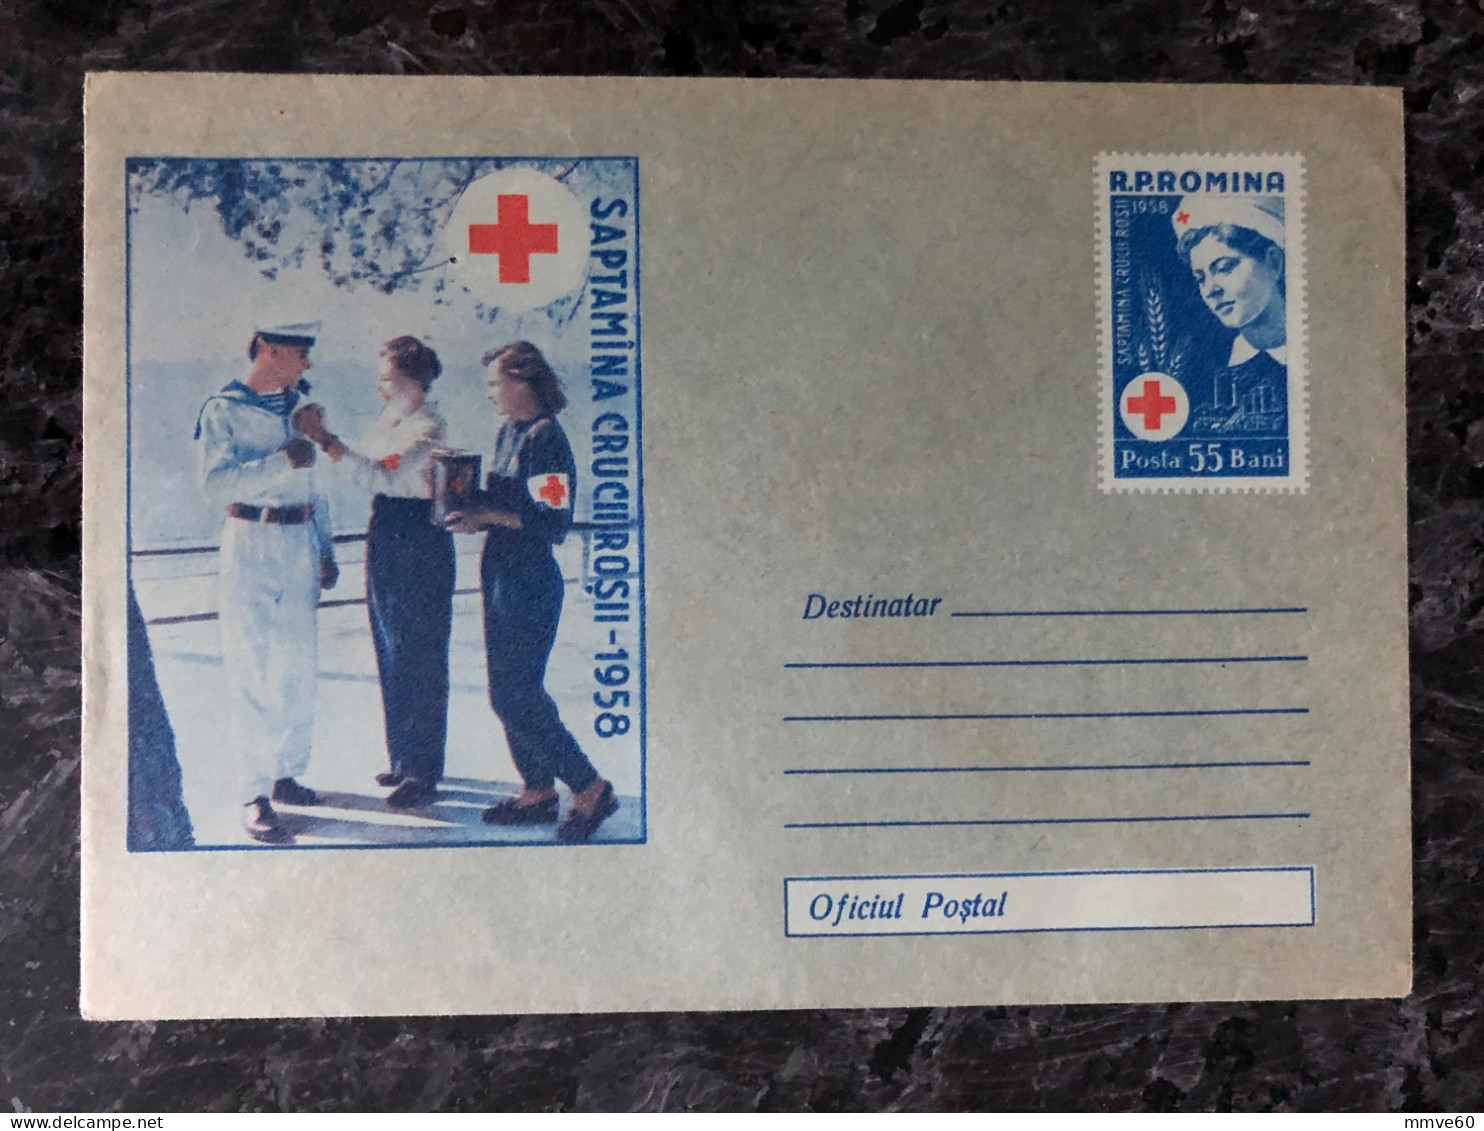 ROMANIA OFFICIAL POSTAL COVER 1958 YEAR  RED CROSS  VACCINATION HEALTH MEDICINE - Storia Postale